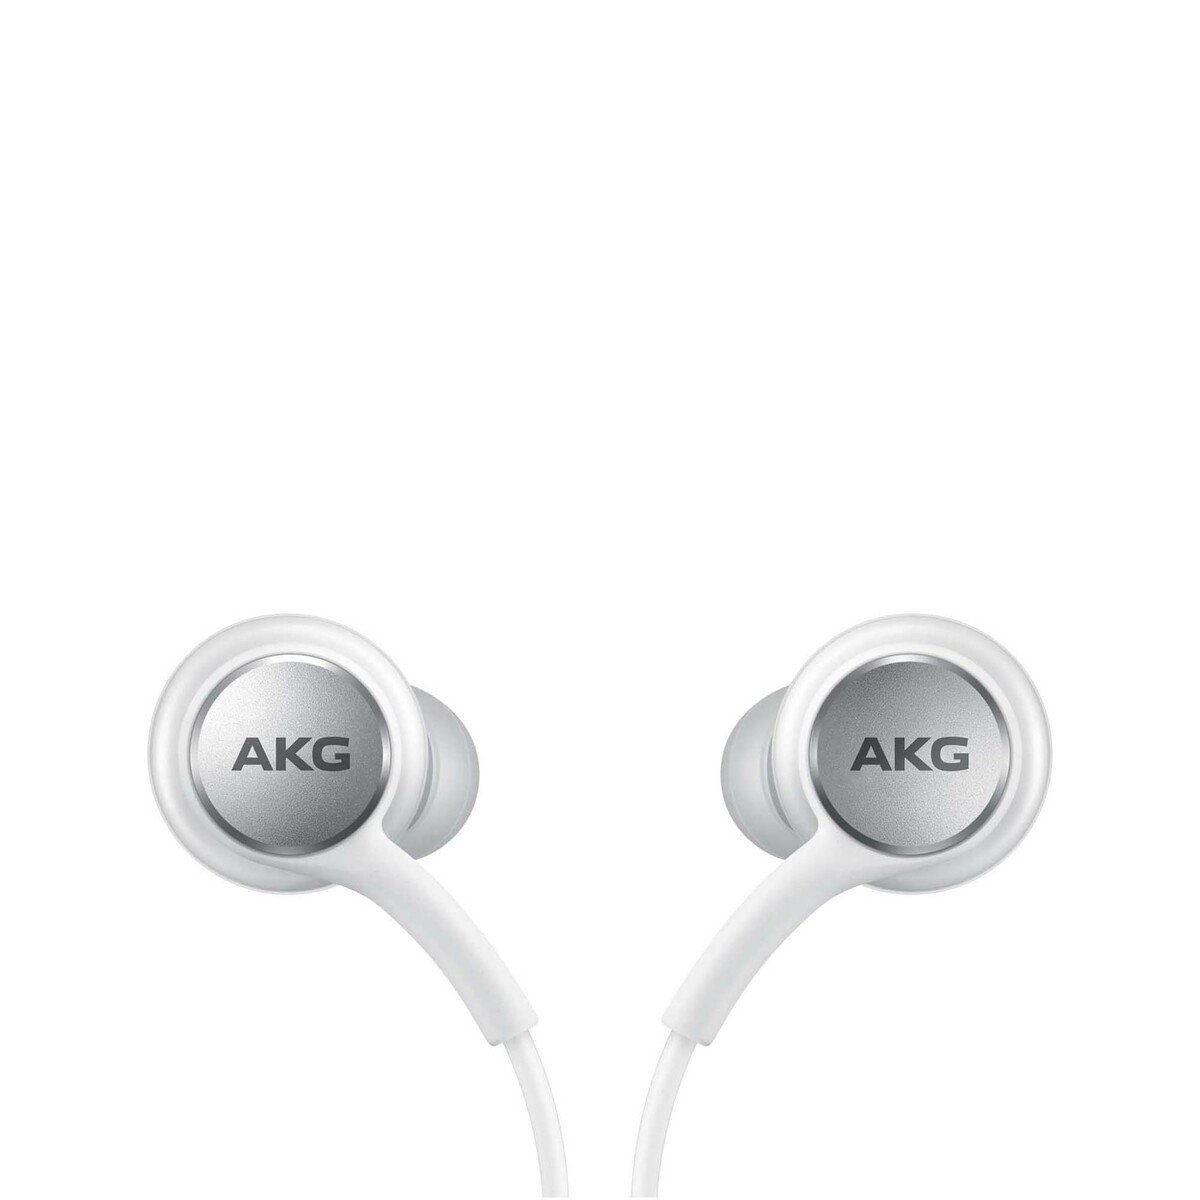 Samsung Stereo In-Ear Earphones Type-C | Kuwait Free Hands Online Lulu | Price EO-IC100 Best at Mobile (White)